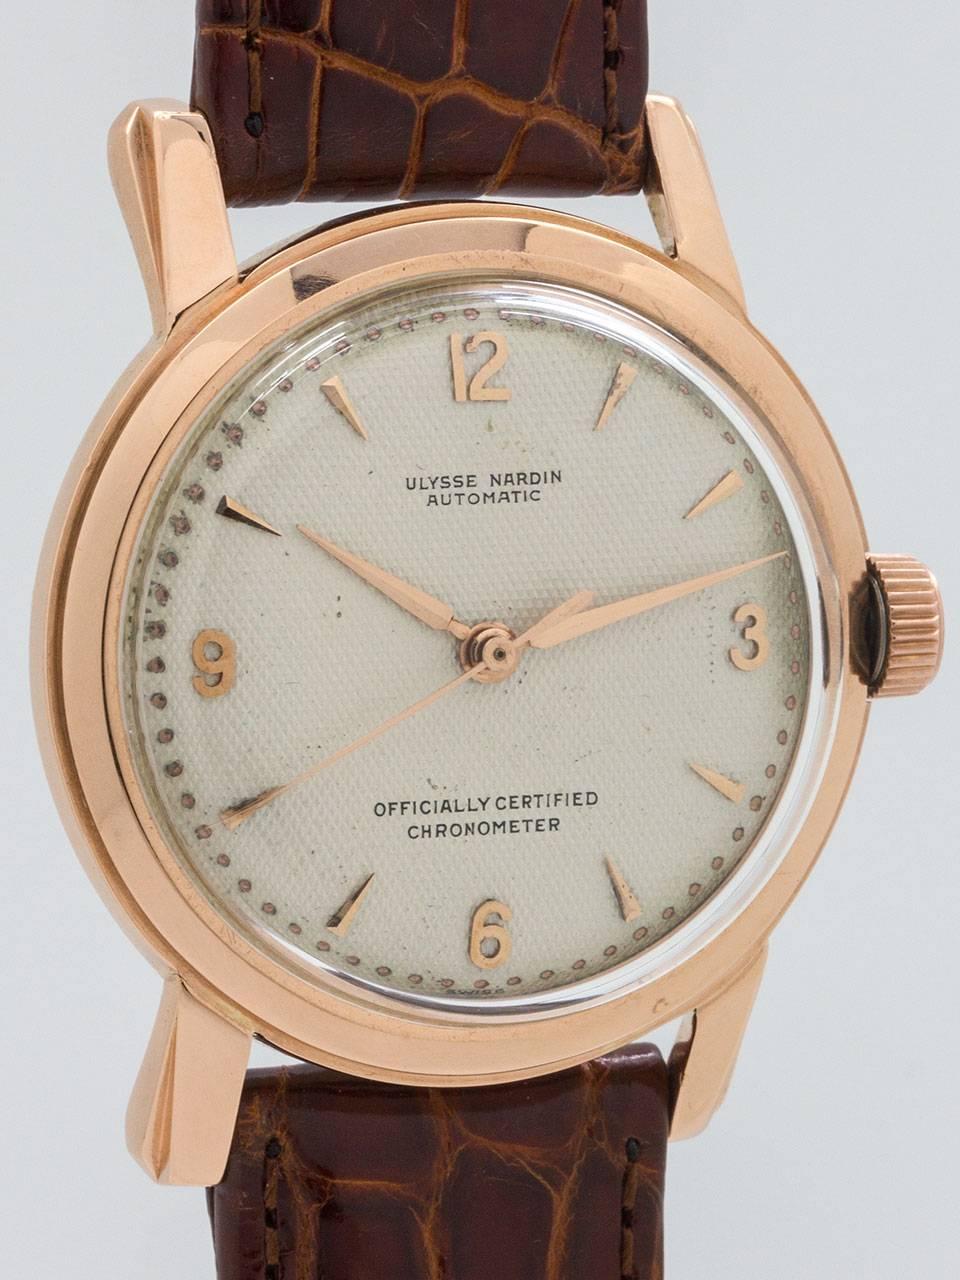 Vintage Ulysee Nardin 18K Rose Gold Automatic Dress model circa 1950s. Featuring a robust design 34 X 42mm case with heavy and sloped lugs. original antique white waffle dial with applied rose gold indexes and rose gold tapered alpha style hands.